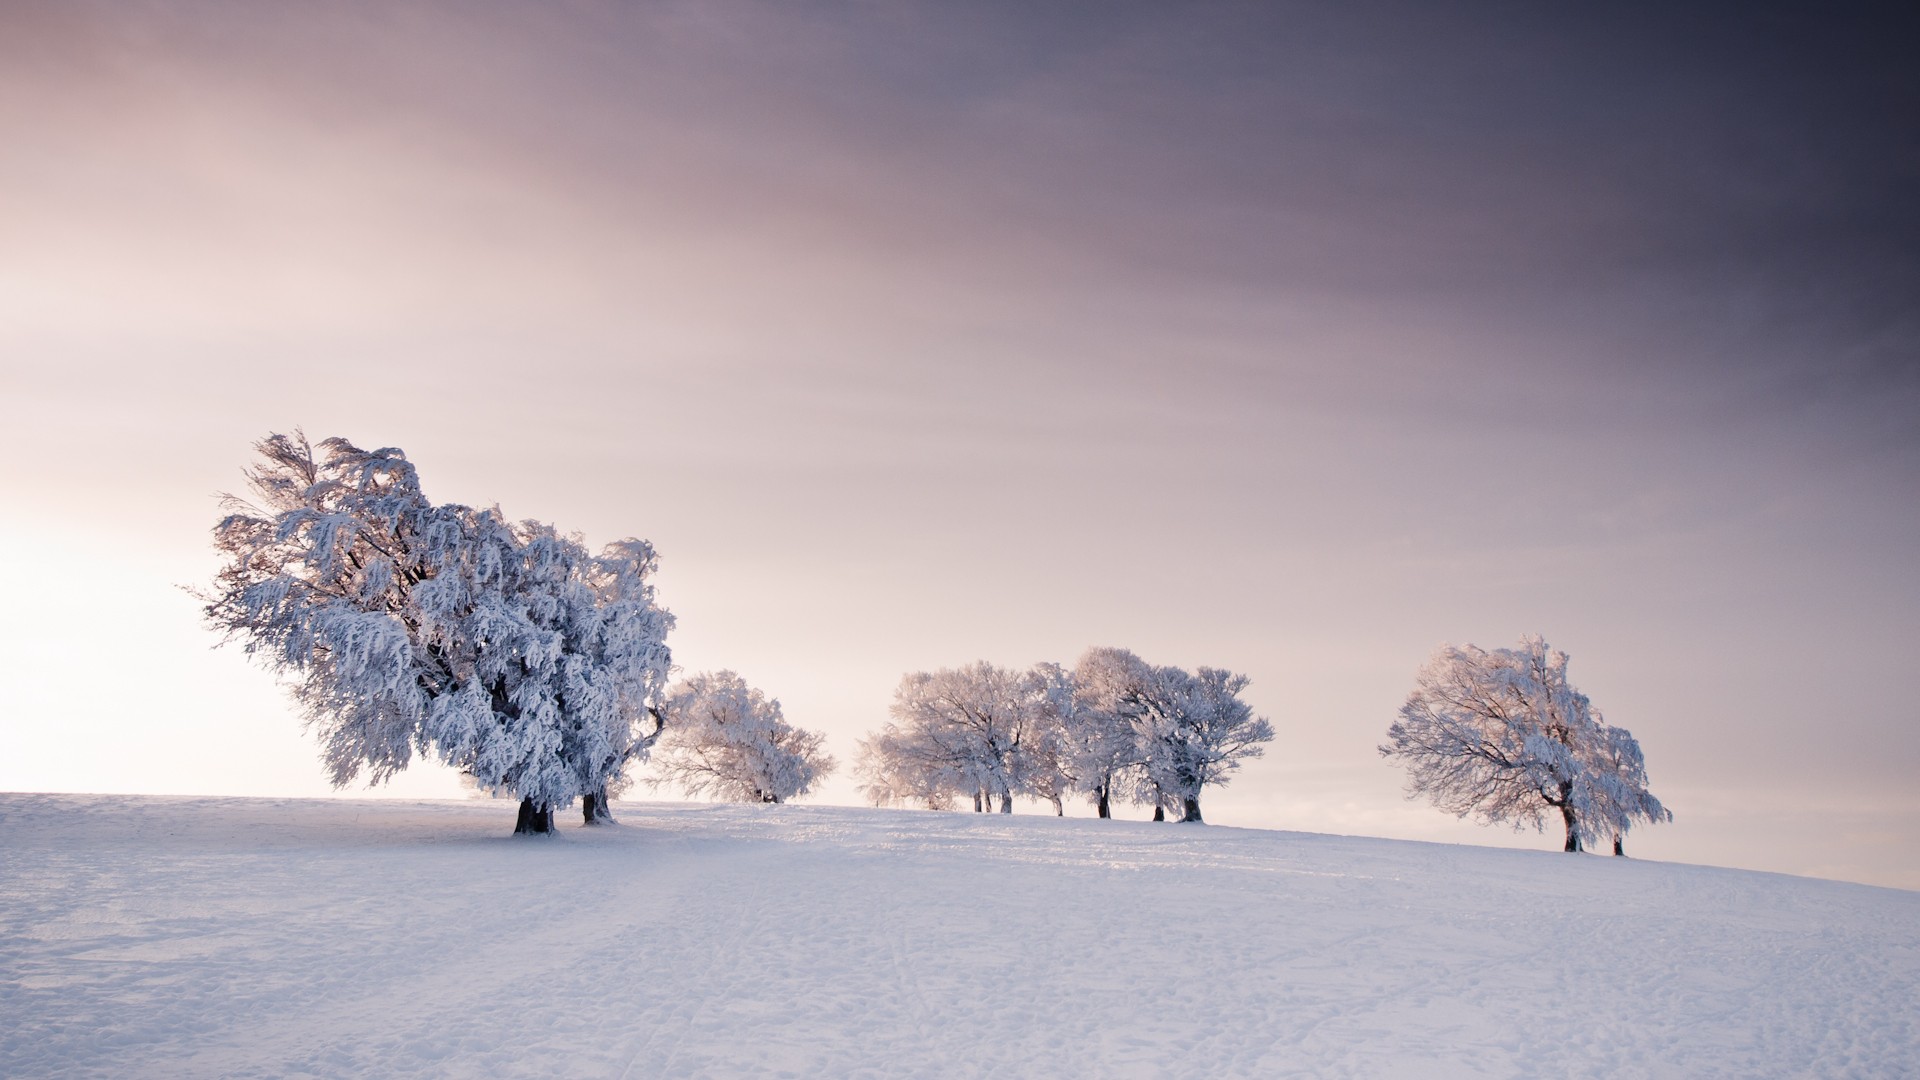 General 1920x1080 nature landscape winter snow field trees overcast sky